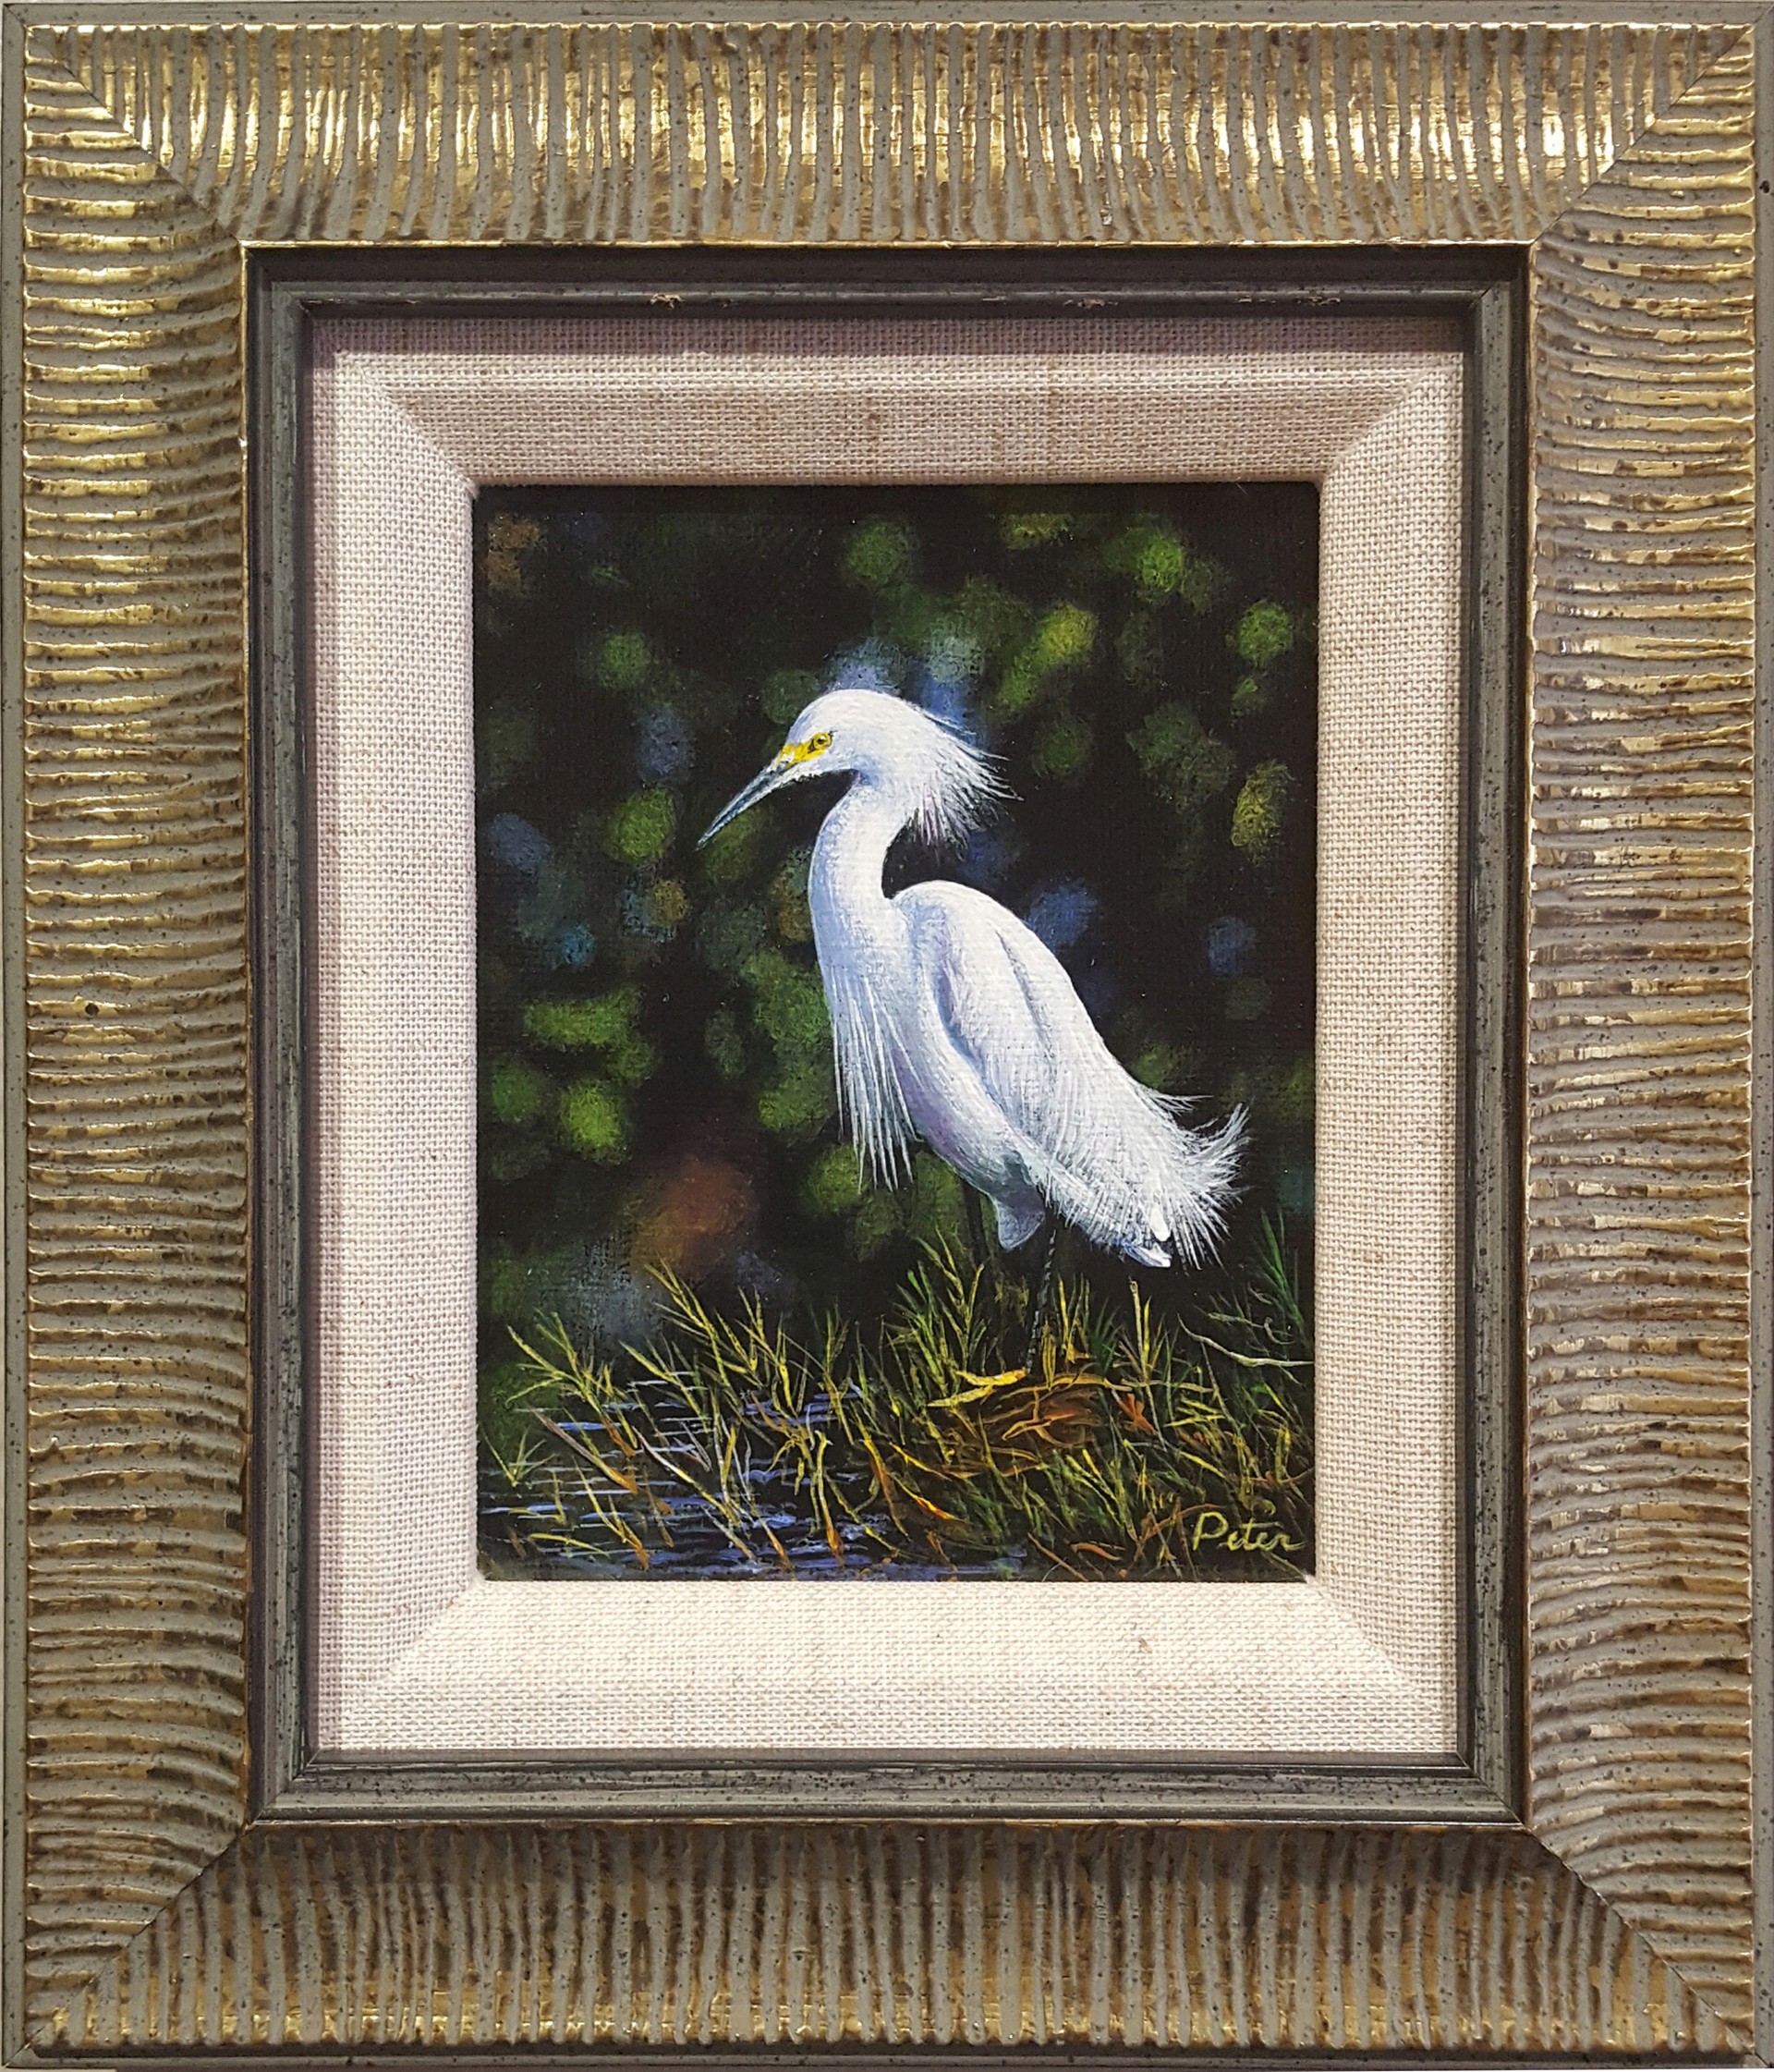 Egret Redoux by Henry Peter